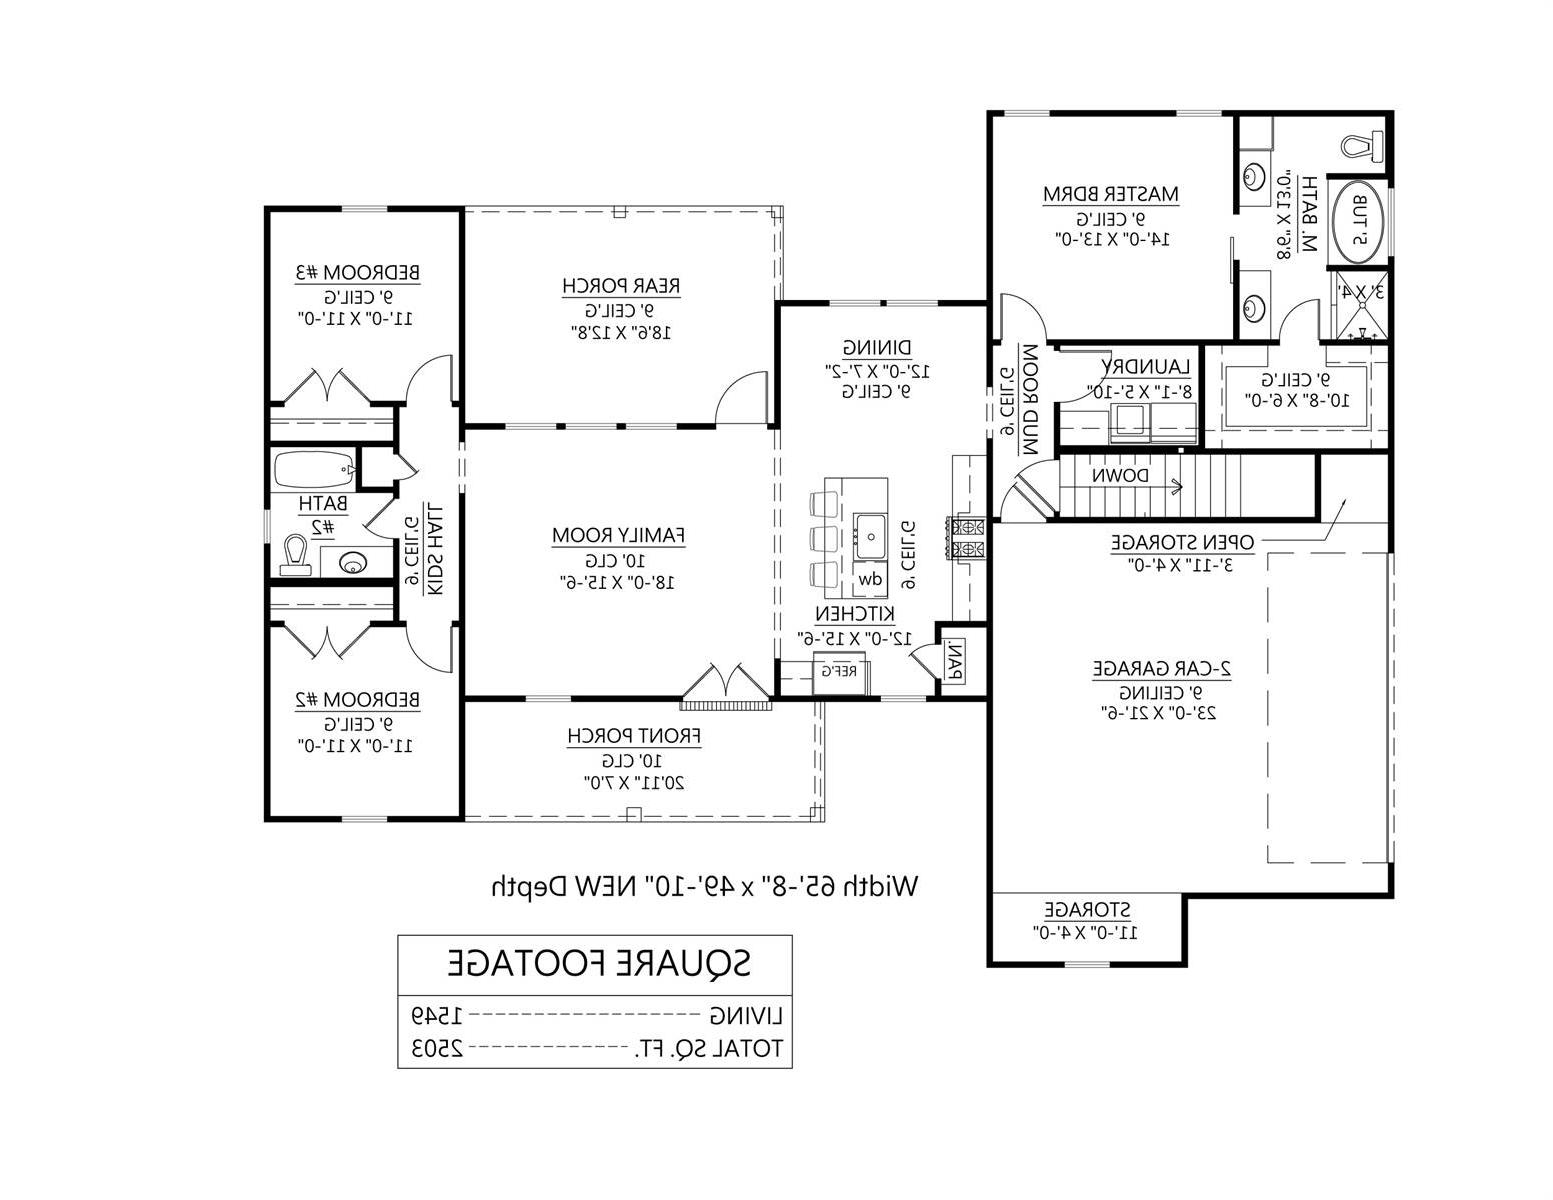 Basement Option Plan image of The Spruce Pine House Plan